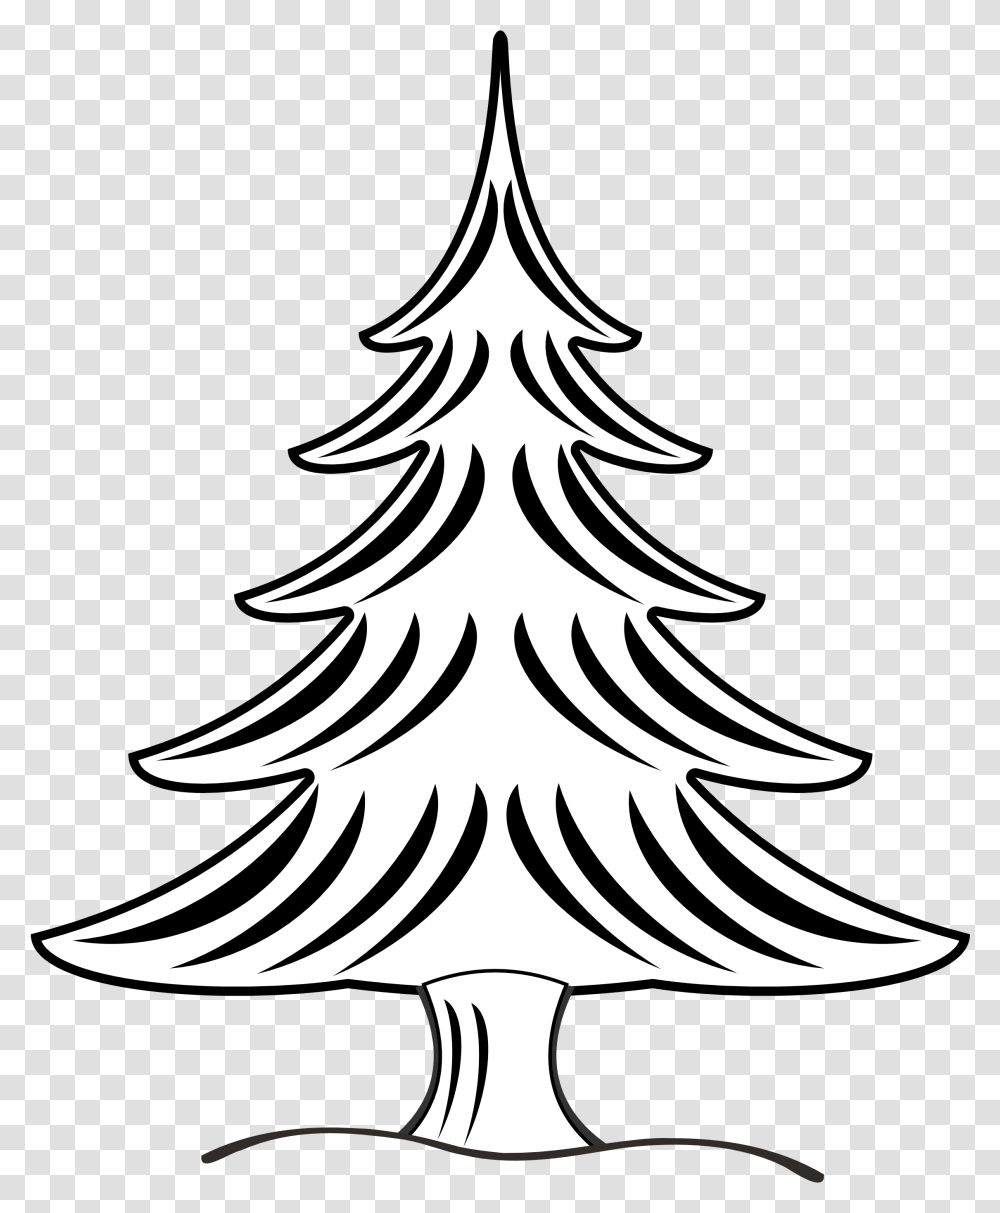 Christmas Tree Black And White Snow Christmas Tree Christmas Tree Clipart Black And White Free, Bonfire, Flame, Stencil Transparent Png